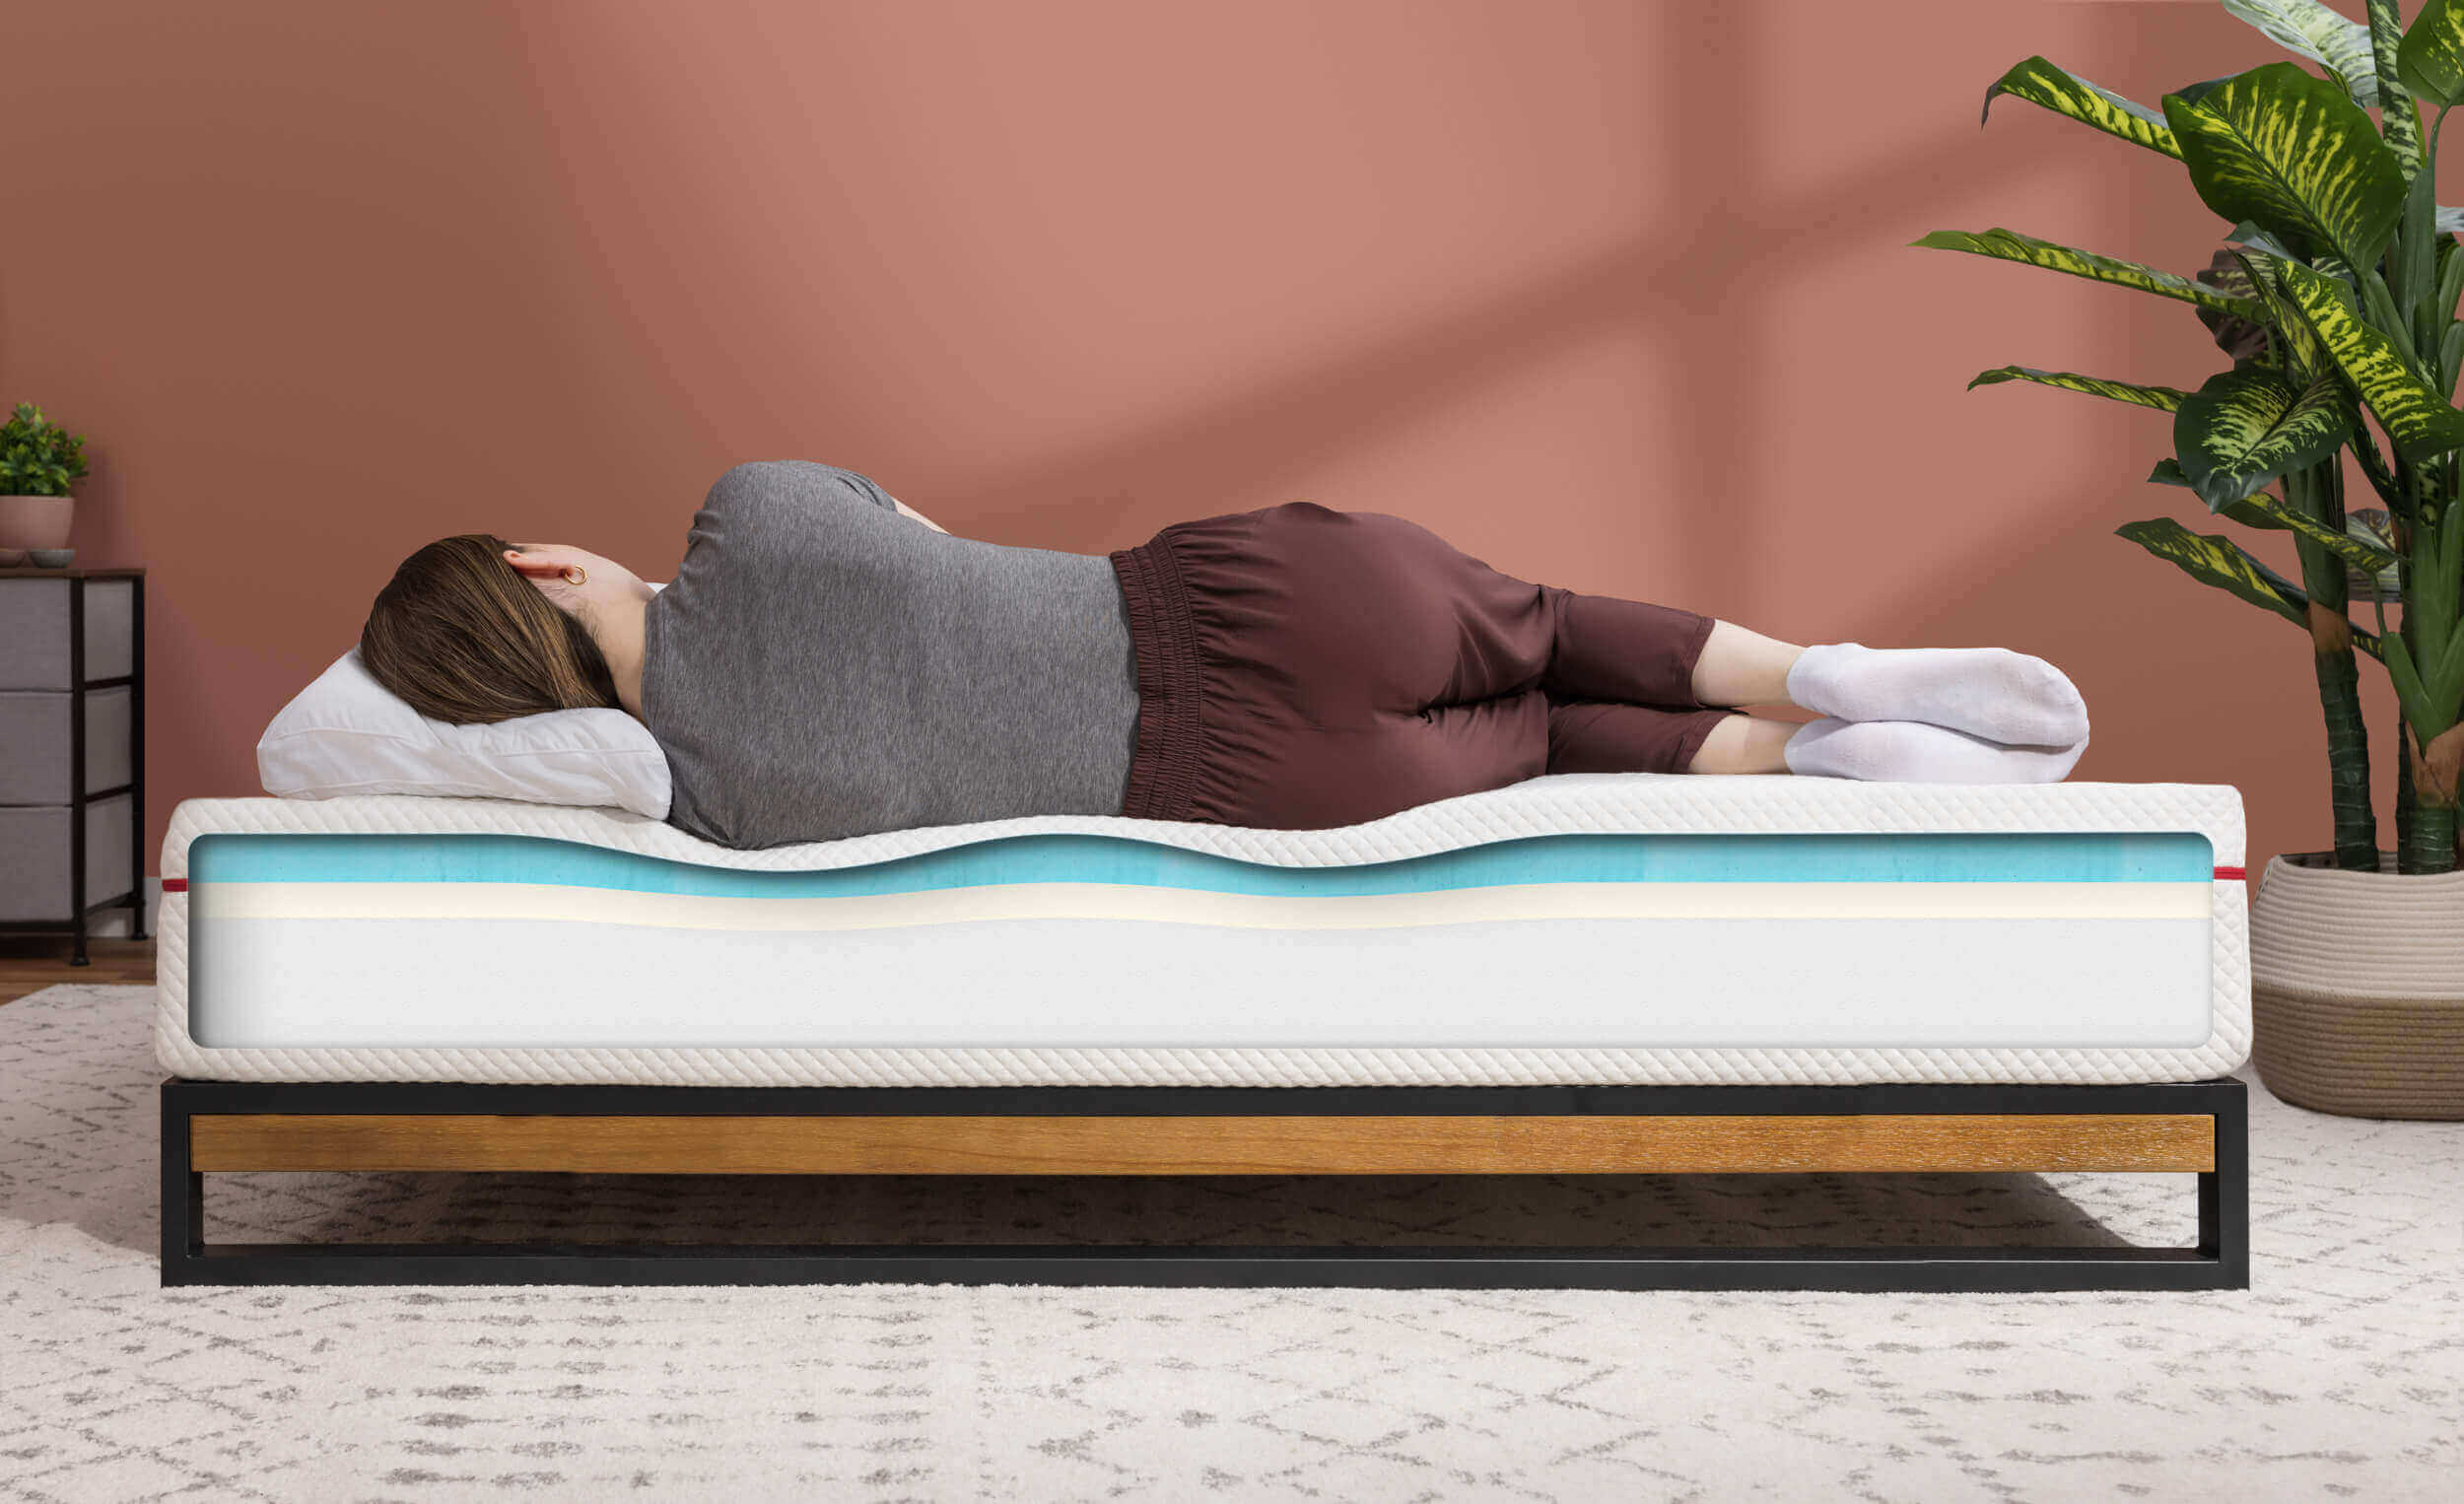 Woman on her side on bed showing perfect spinal alignment on the Douglas mattress